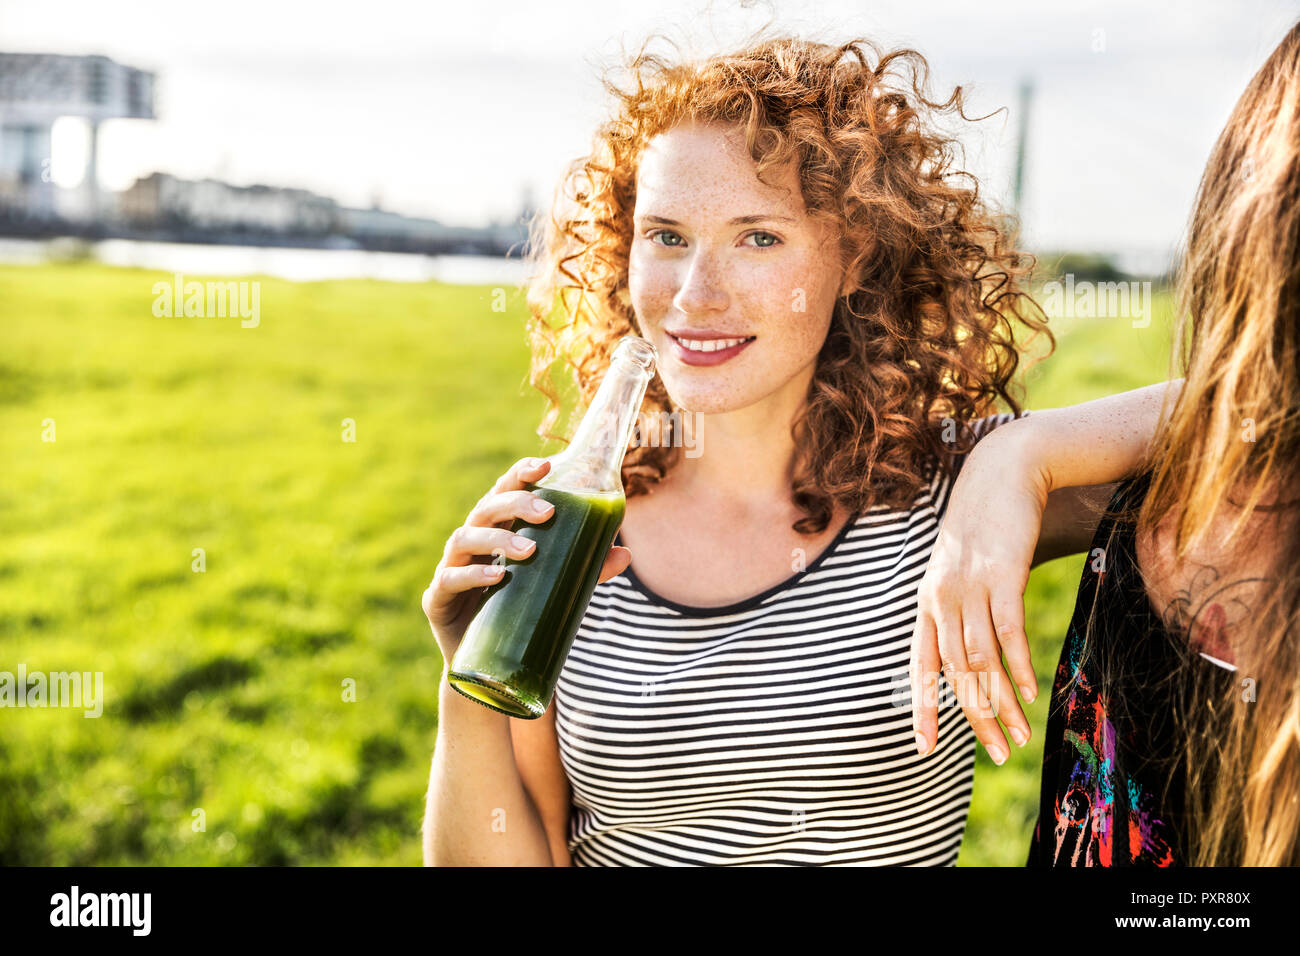 Germany, Cologne, portrait of redheaded young woman enjoying beverage Stock Photo